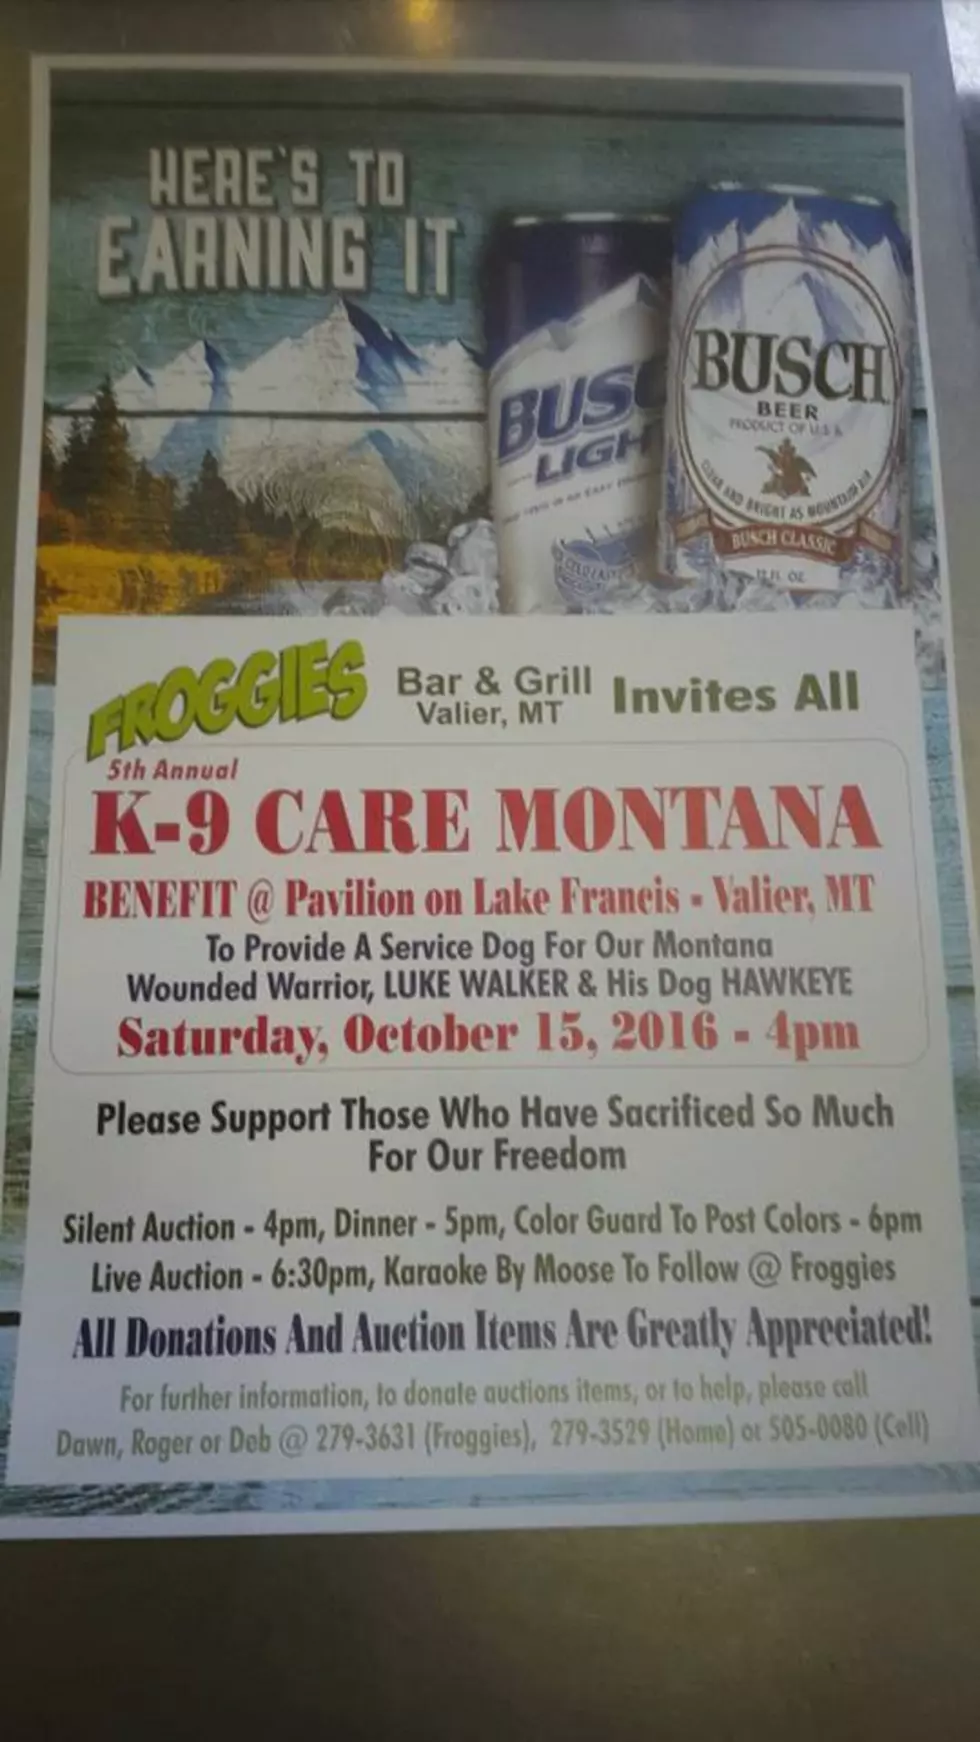 5th ANNUAL K-9 CARE MONTANA AT FROGGIES IN VALIER